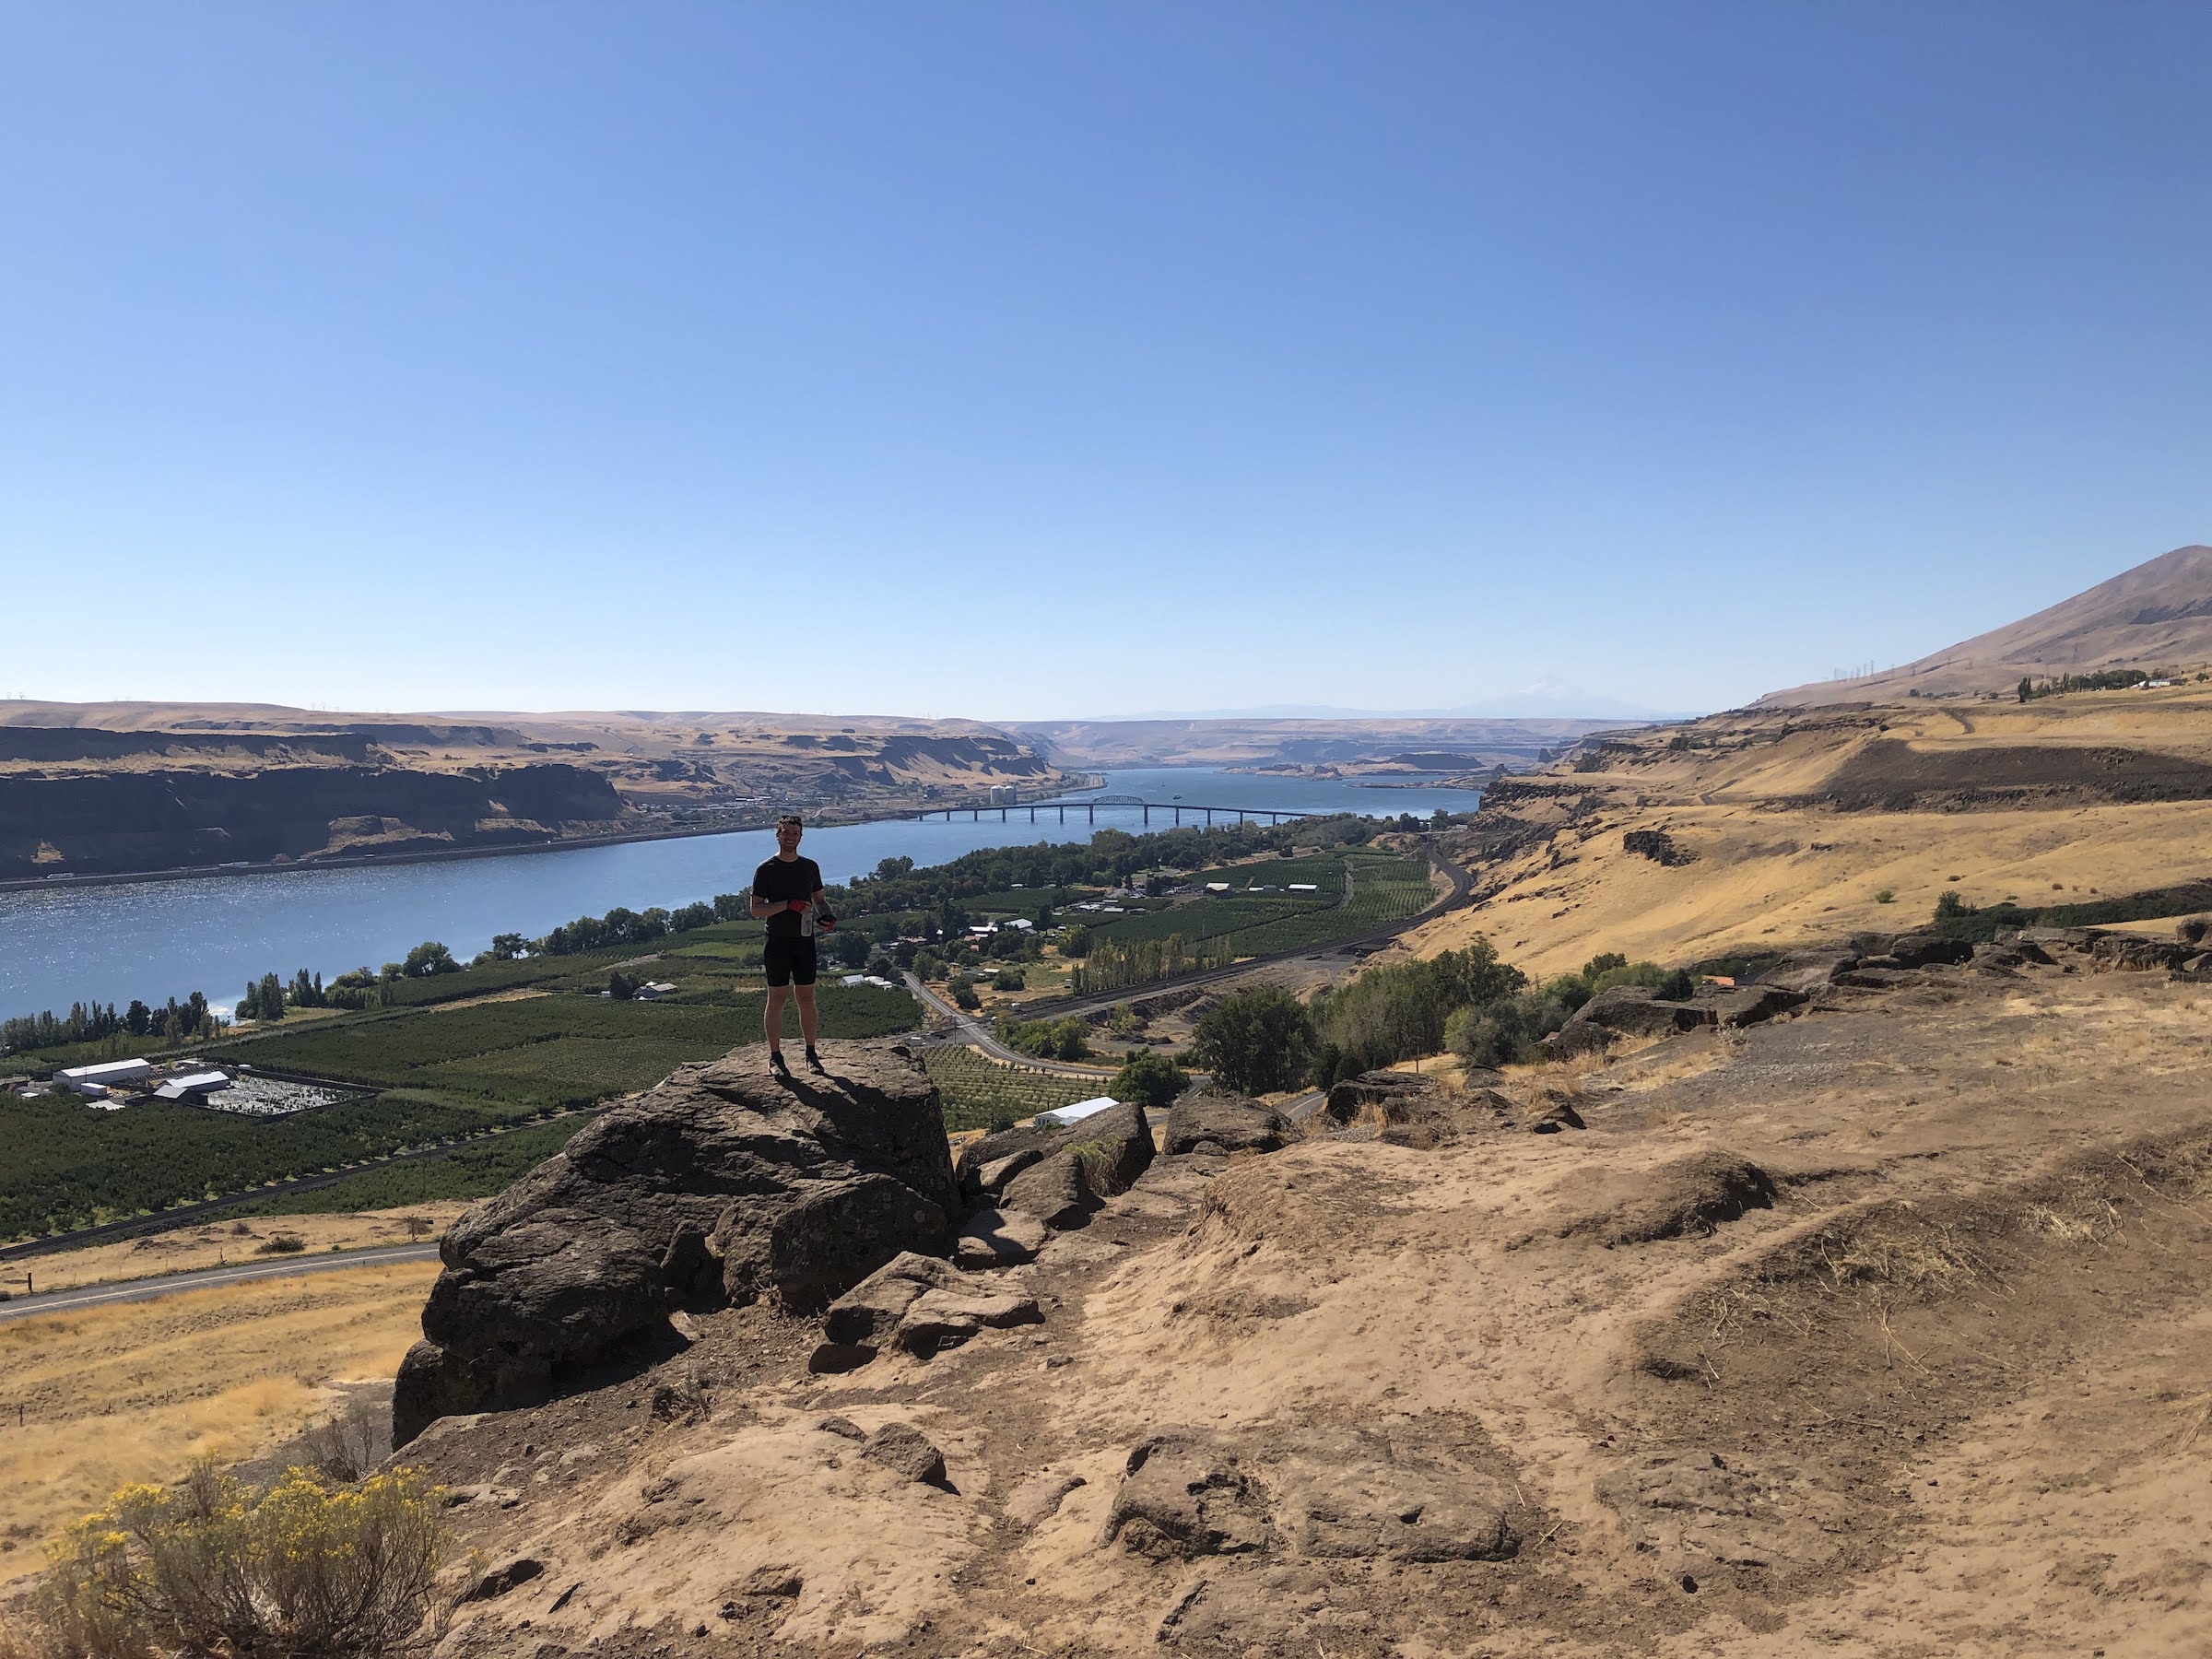 a man stands on a rock at the top of a cliff overlooking the Columbia river